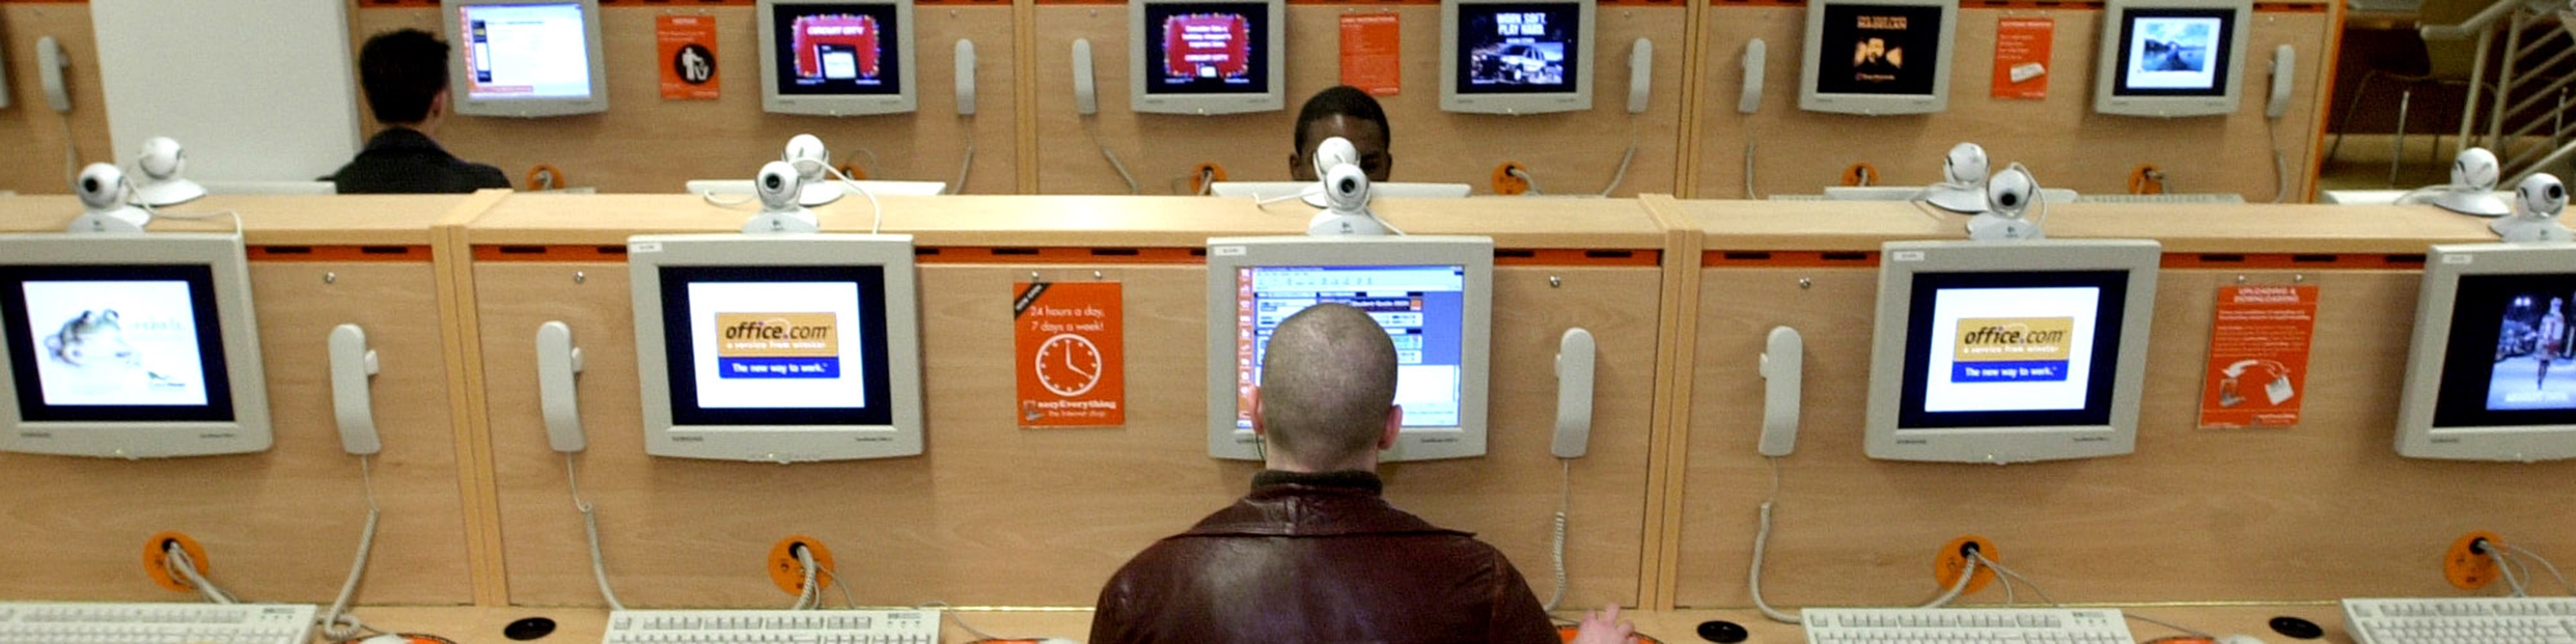 a man sits in front of a computer terminal in an internet cafe